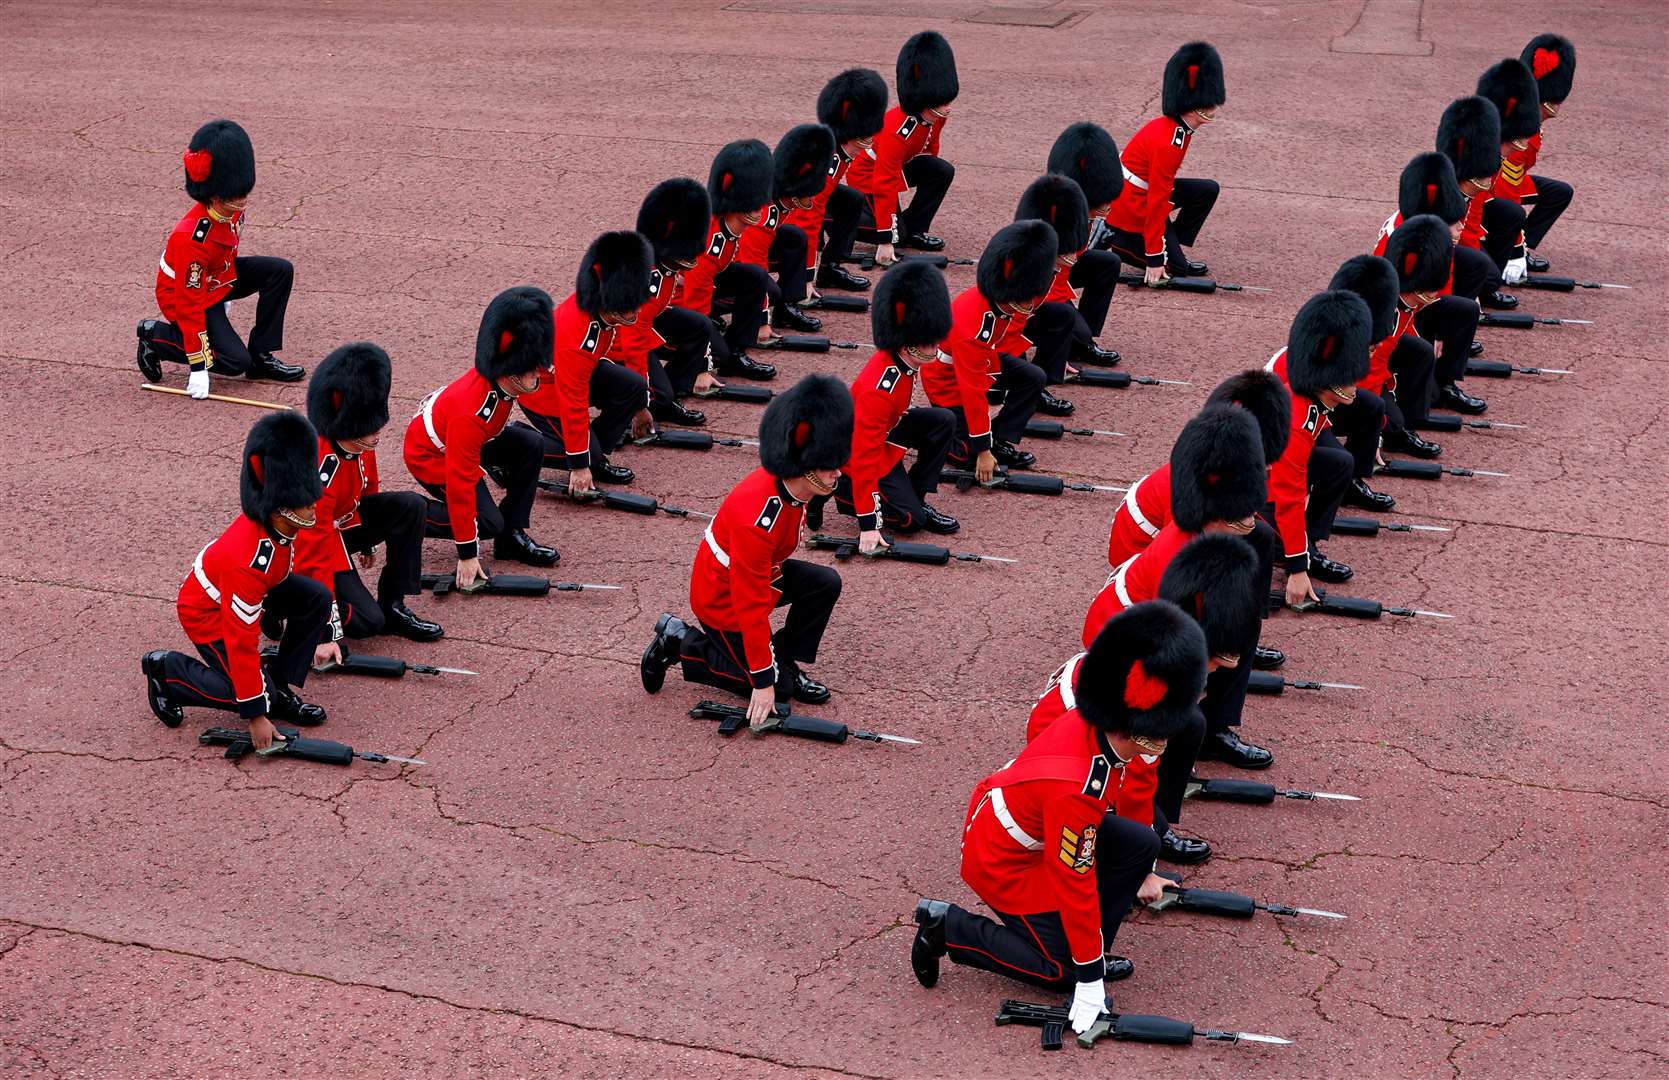 Members of the Coldstream guards kneel and place their rifles on the ground before cheering as the Principal Proclamation is read (Richard Heathcote/PA)